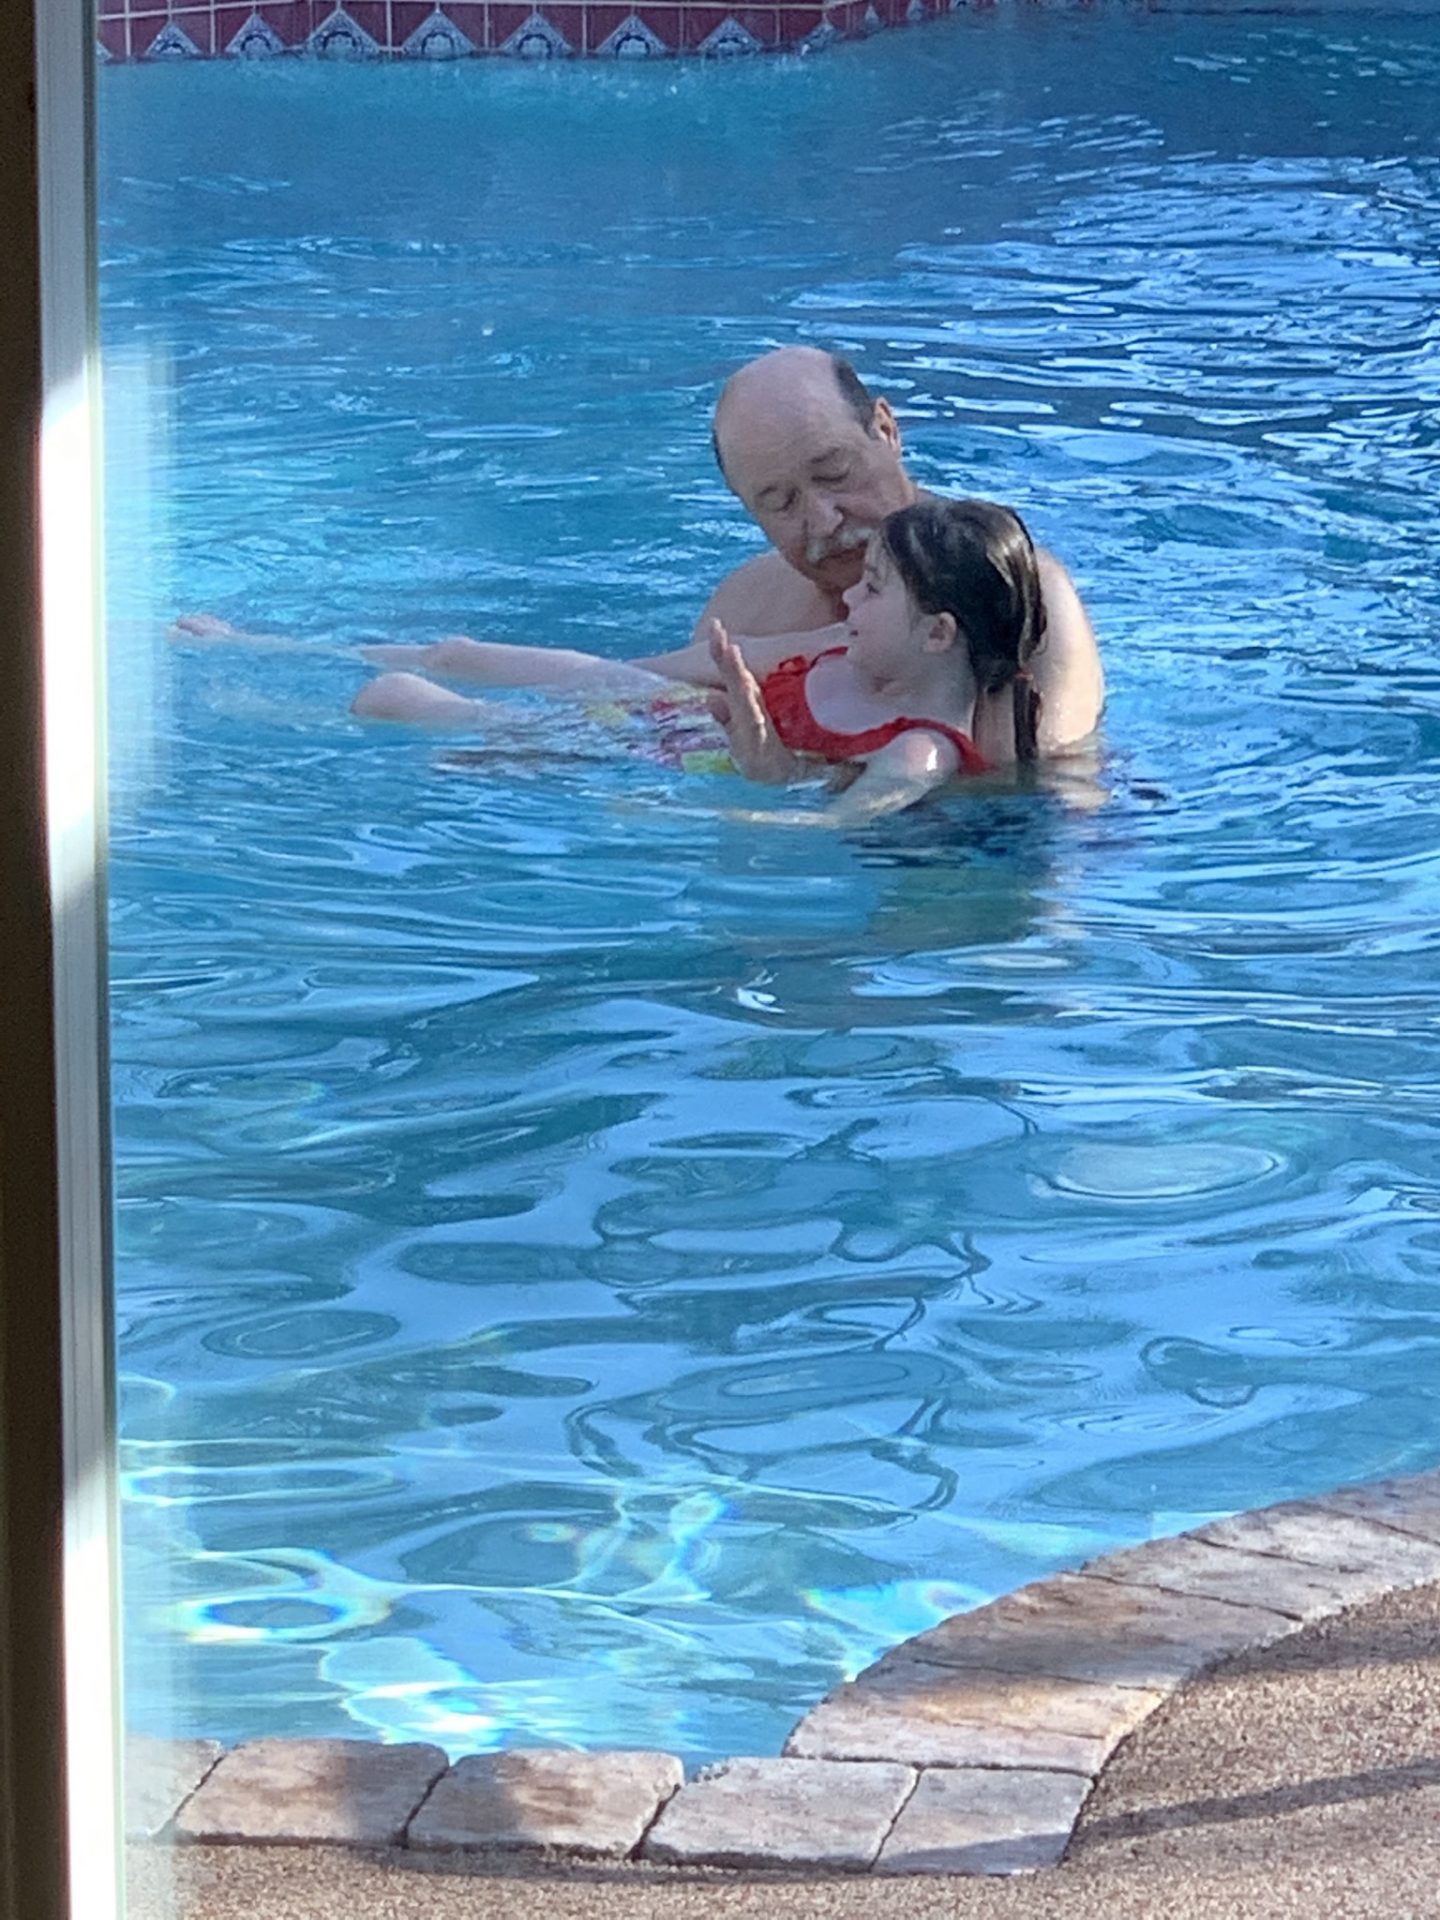 Pa was trying to help his princess learn how to swim